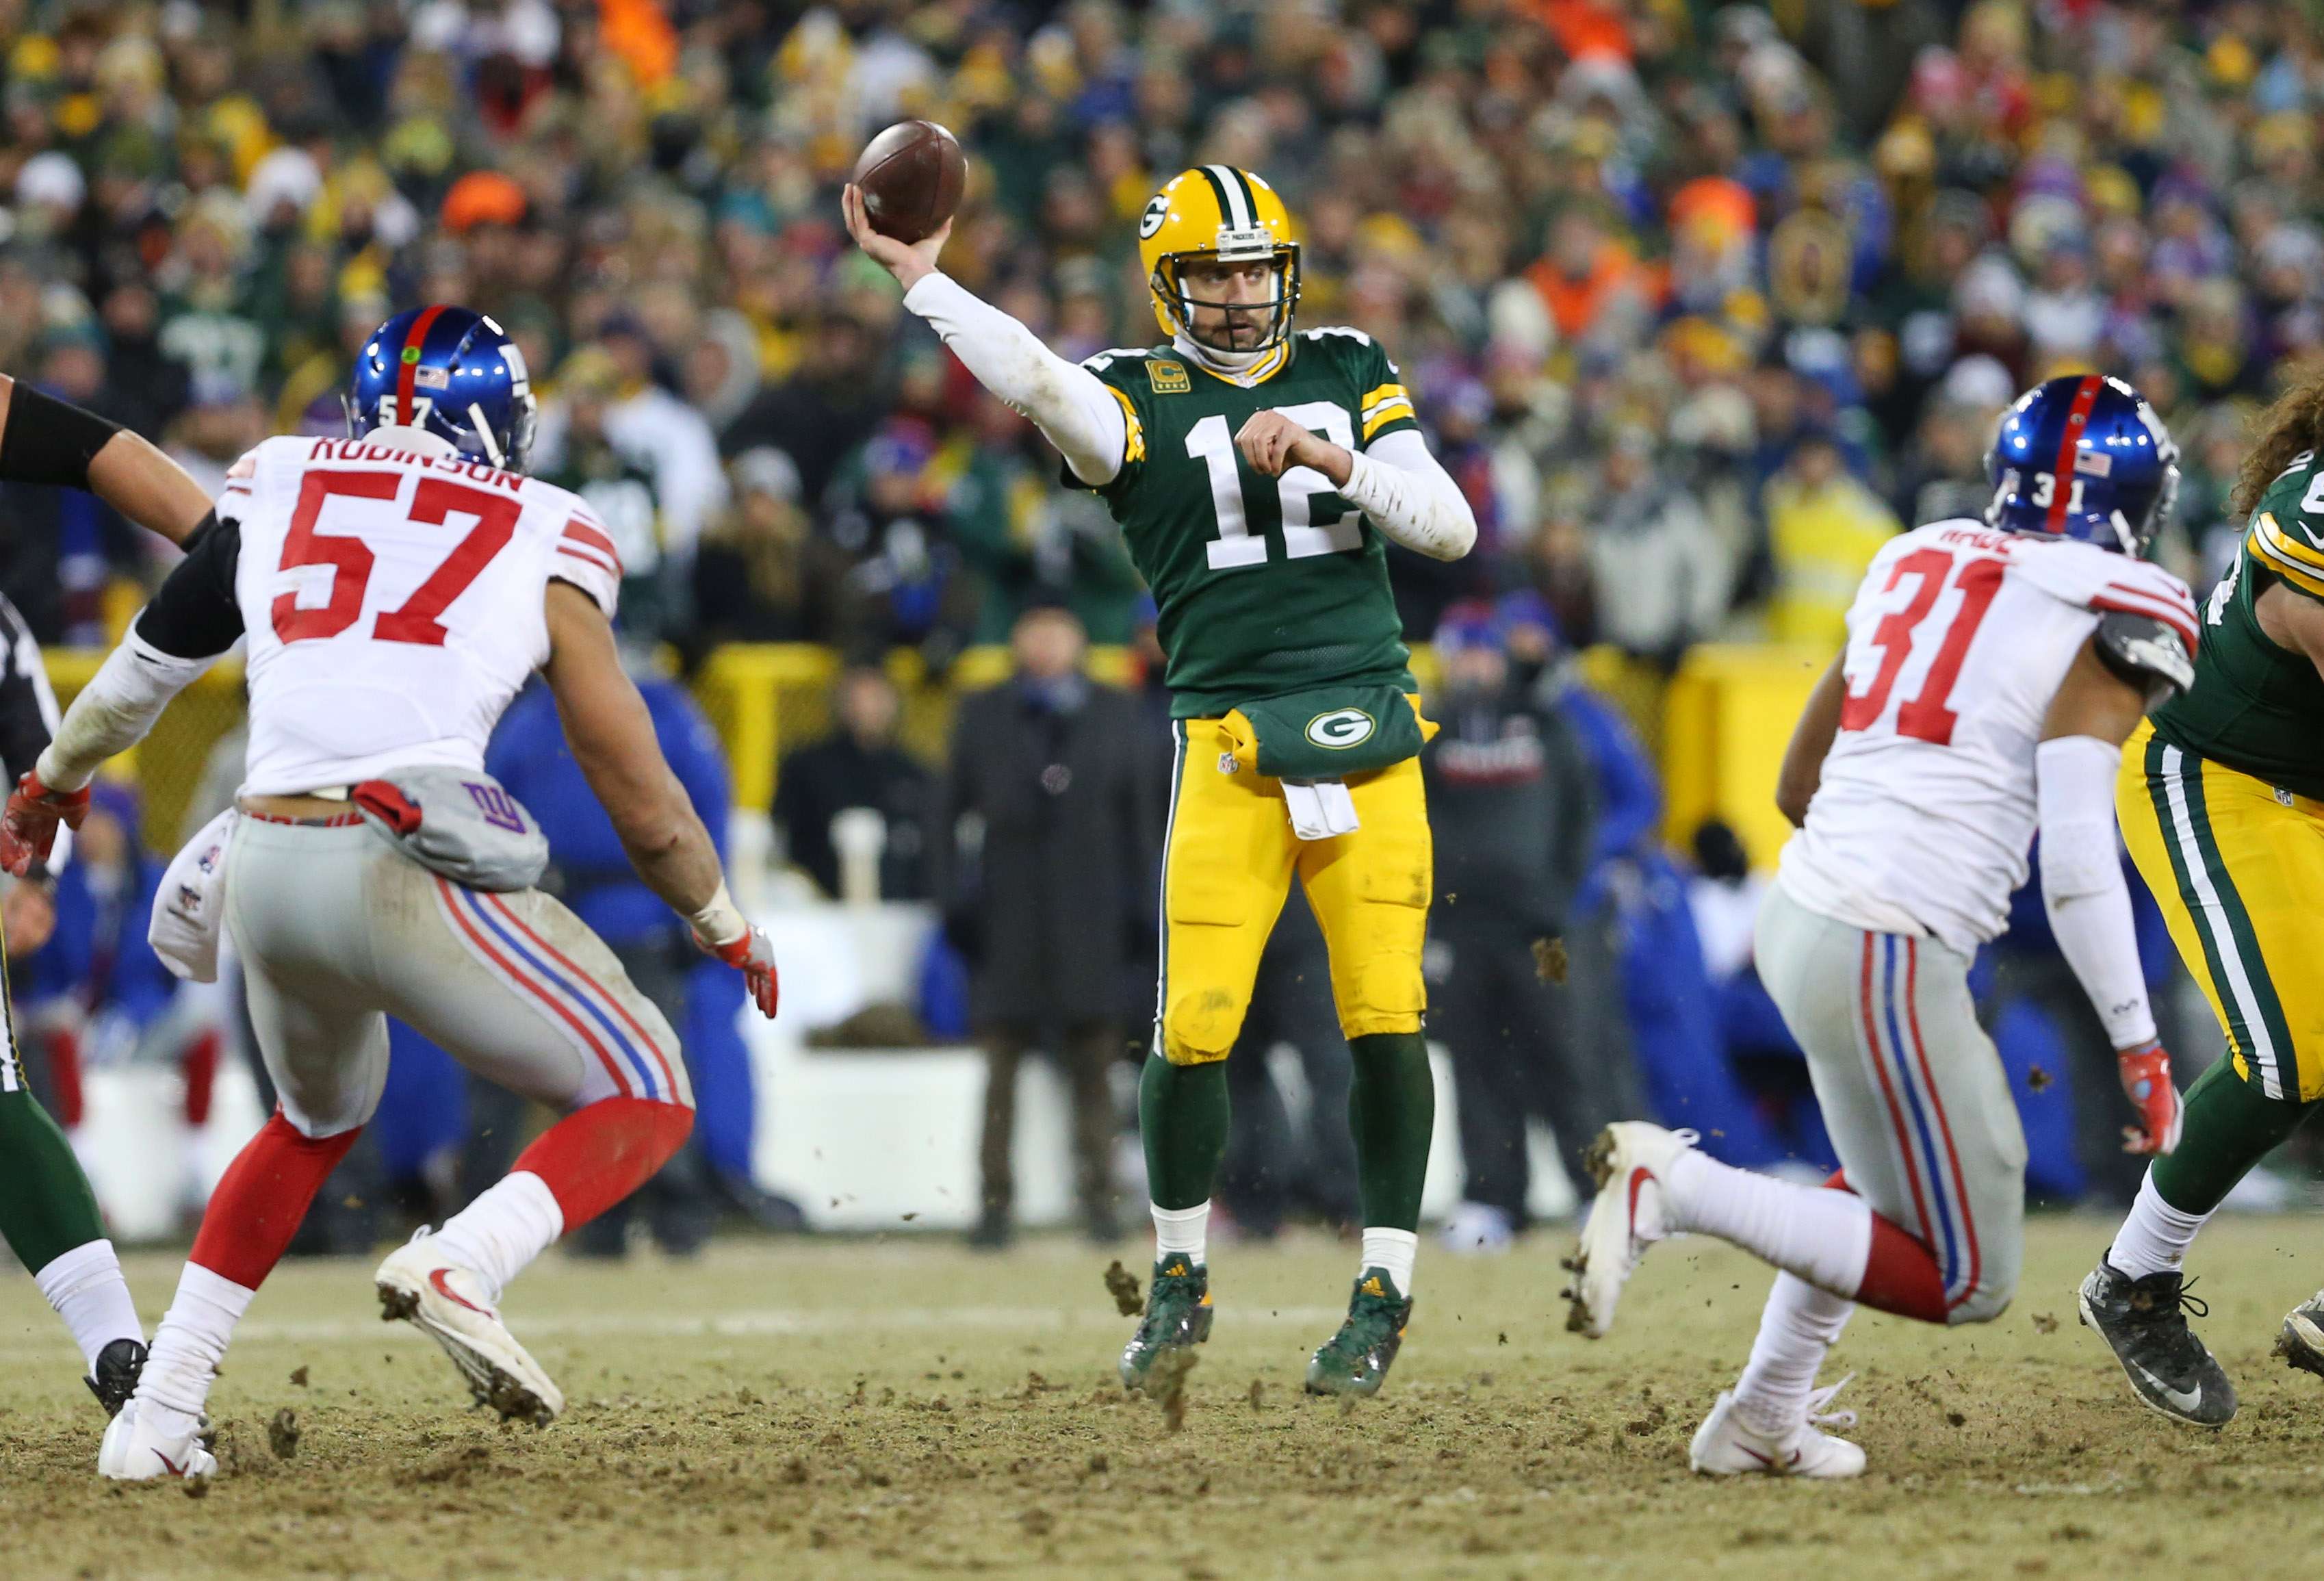 Green Bay Packers quarterback Aaron Rodgers throws a pass during their wild card win over the New York Giants. Photo: USA Today